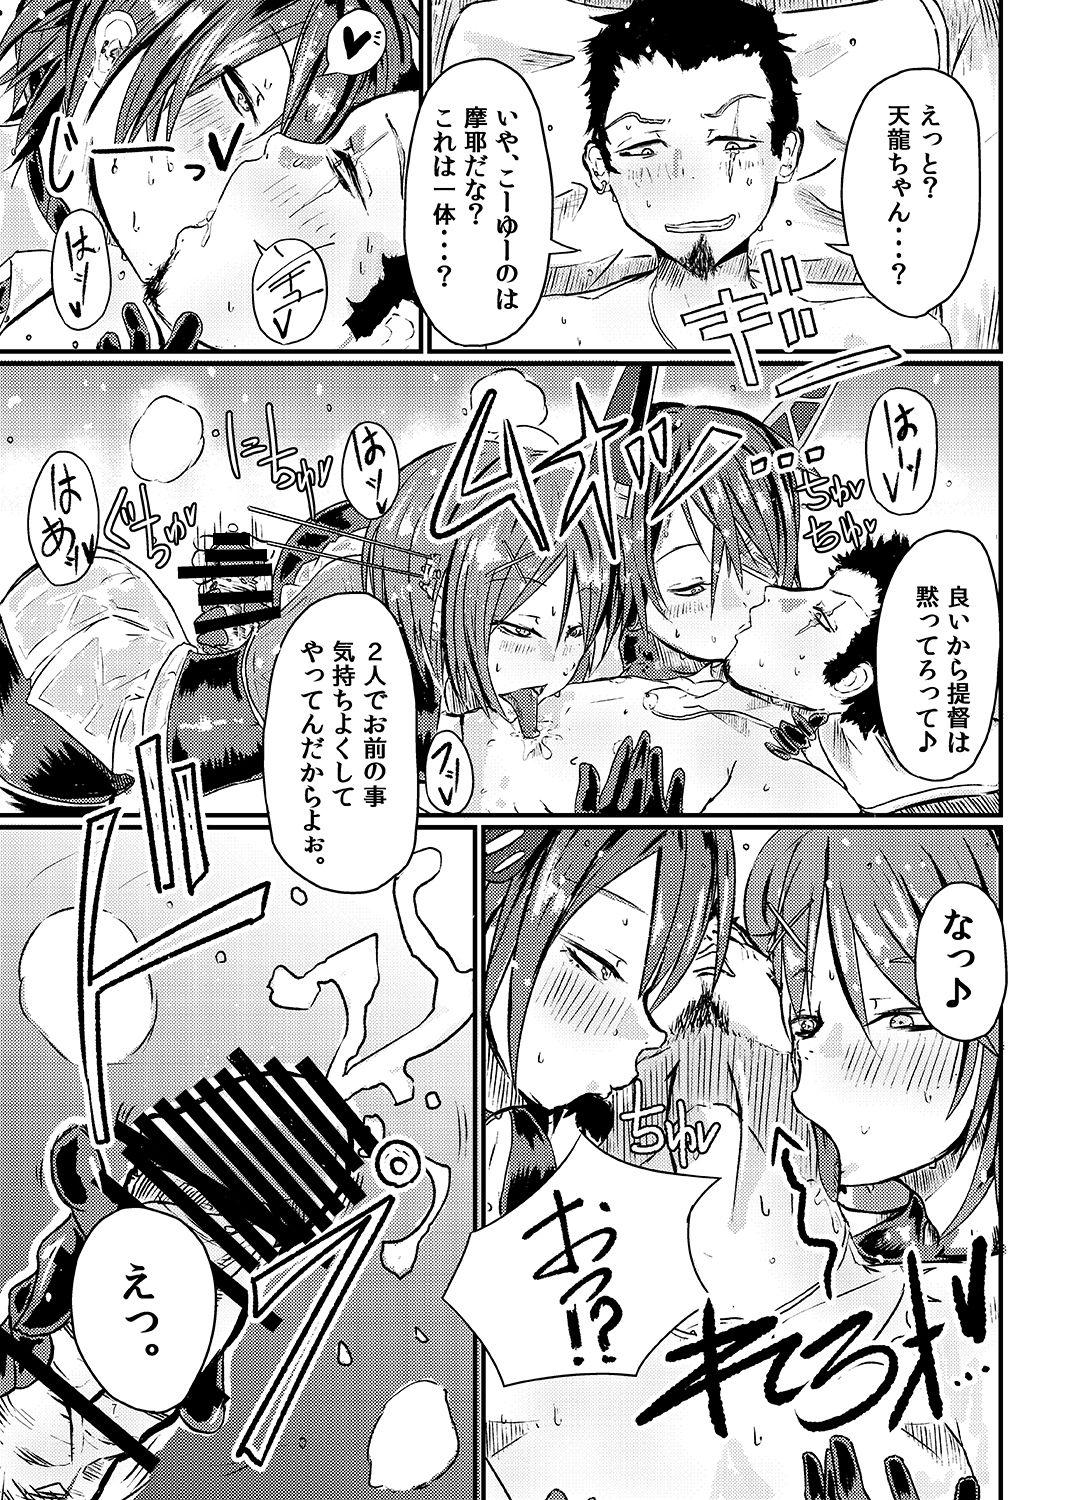 Trimmed RUB DOPE Correct - Kantai collection Anal Gape - Page 6